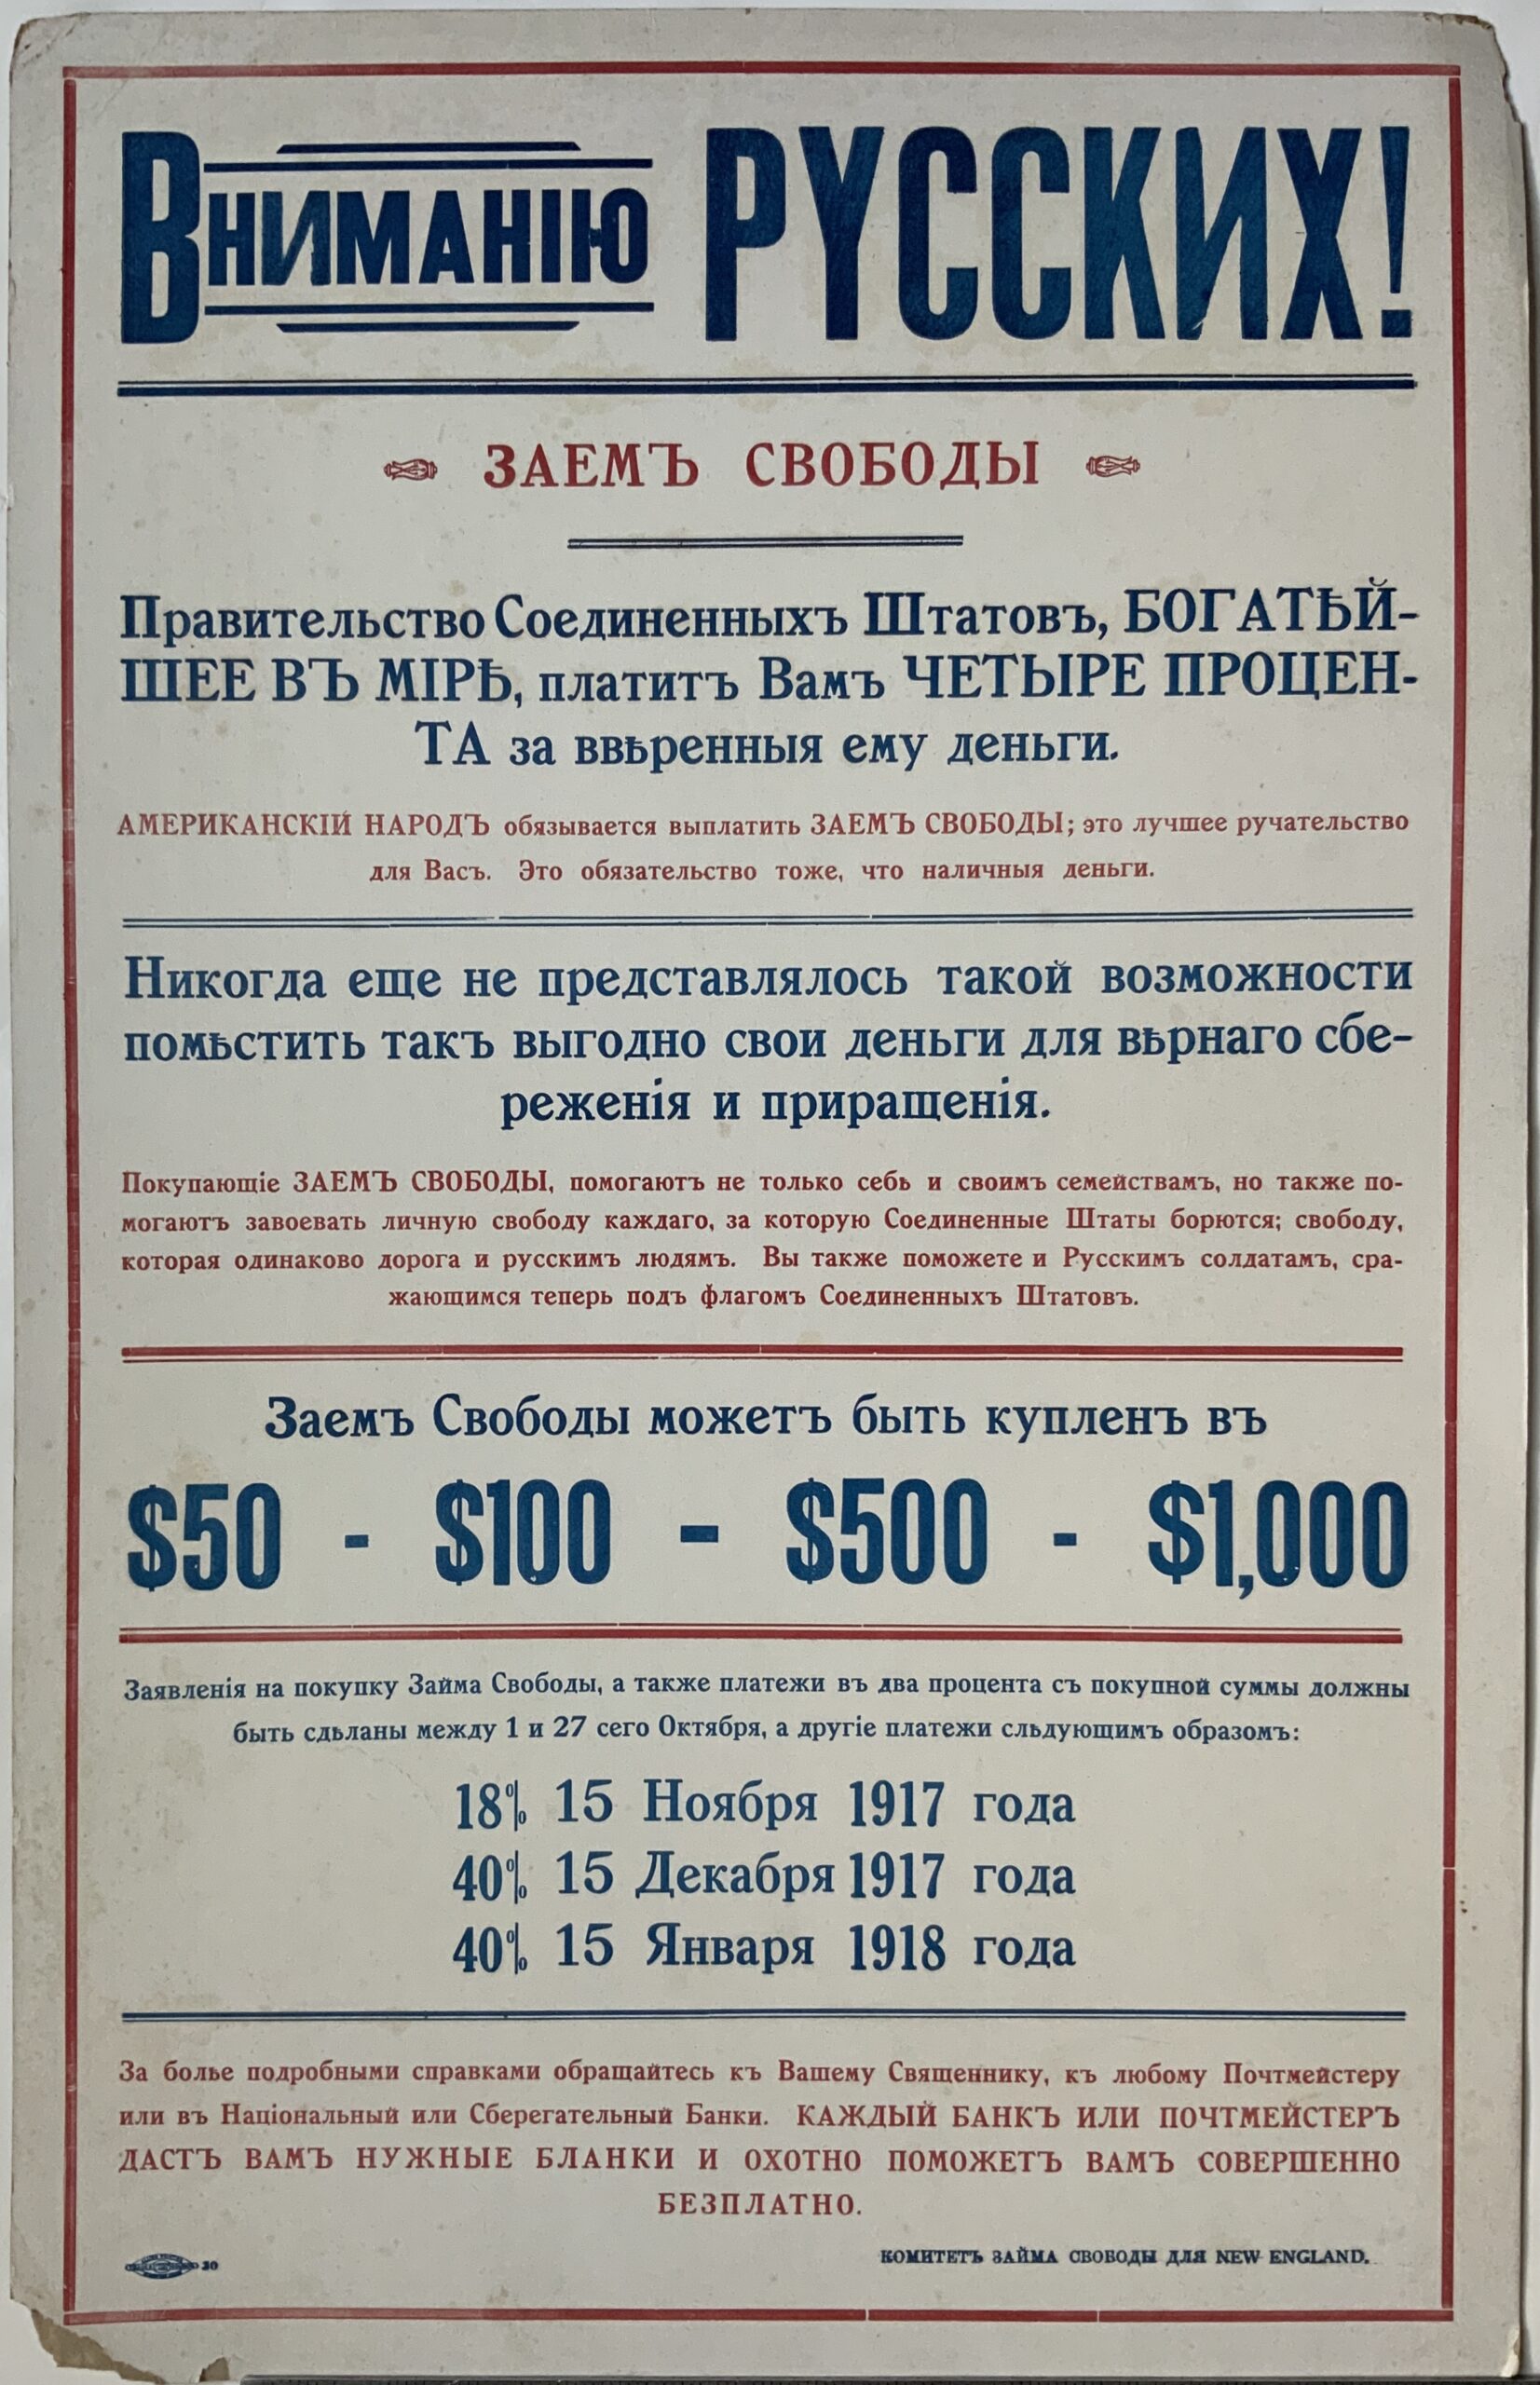 M103	RUSSIAN IMMIGRANT APPEAL FOR LIBERTY LOAN CA. 1917-18